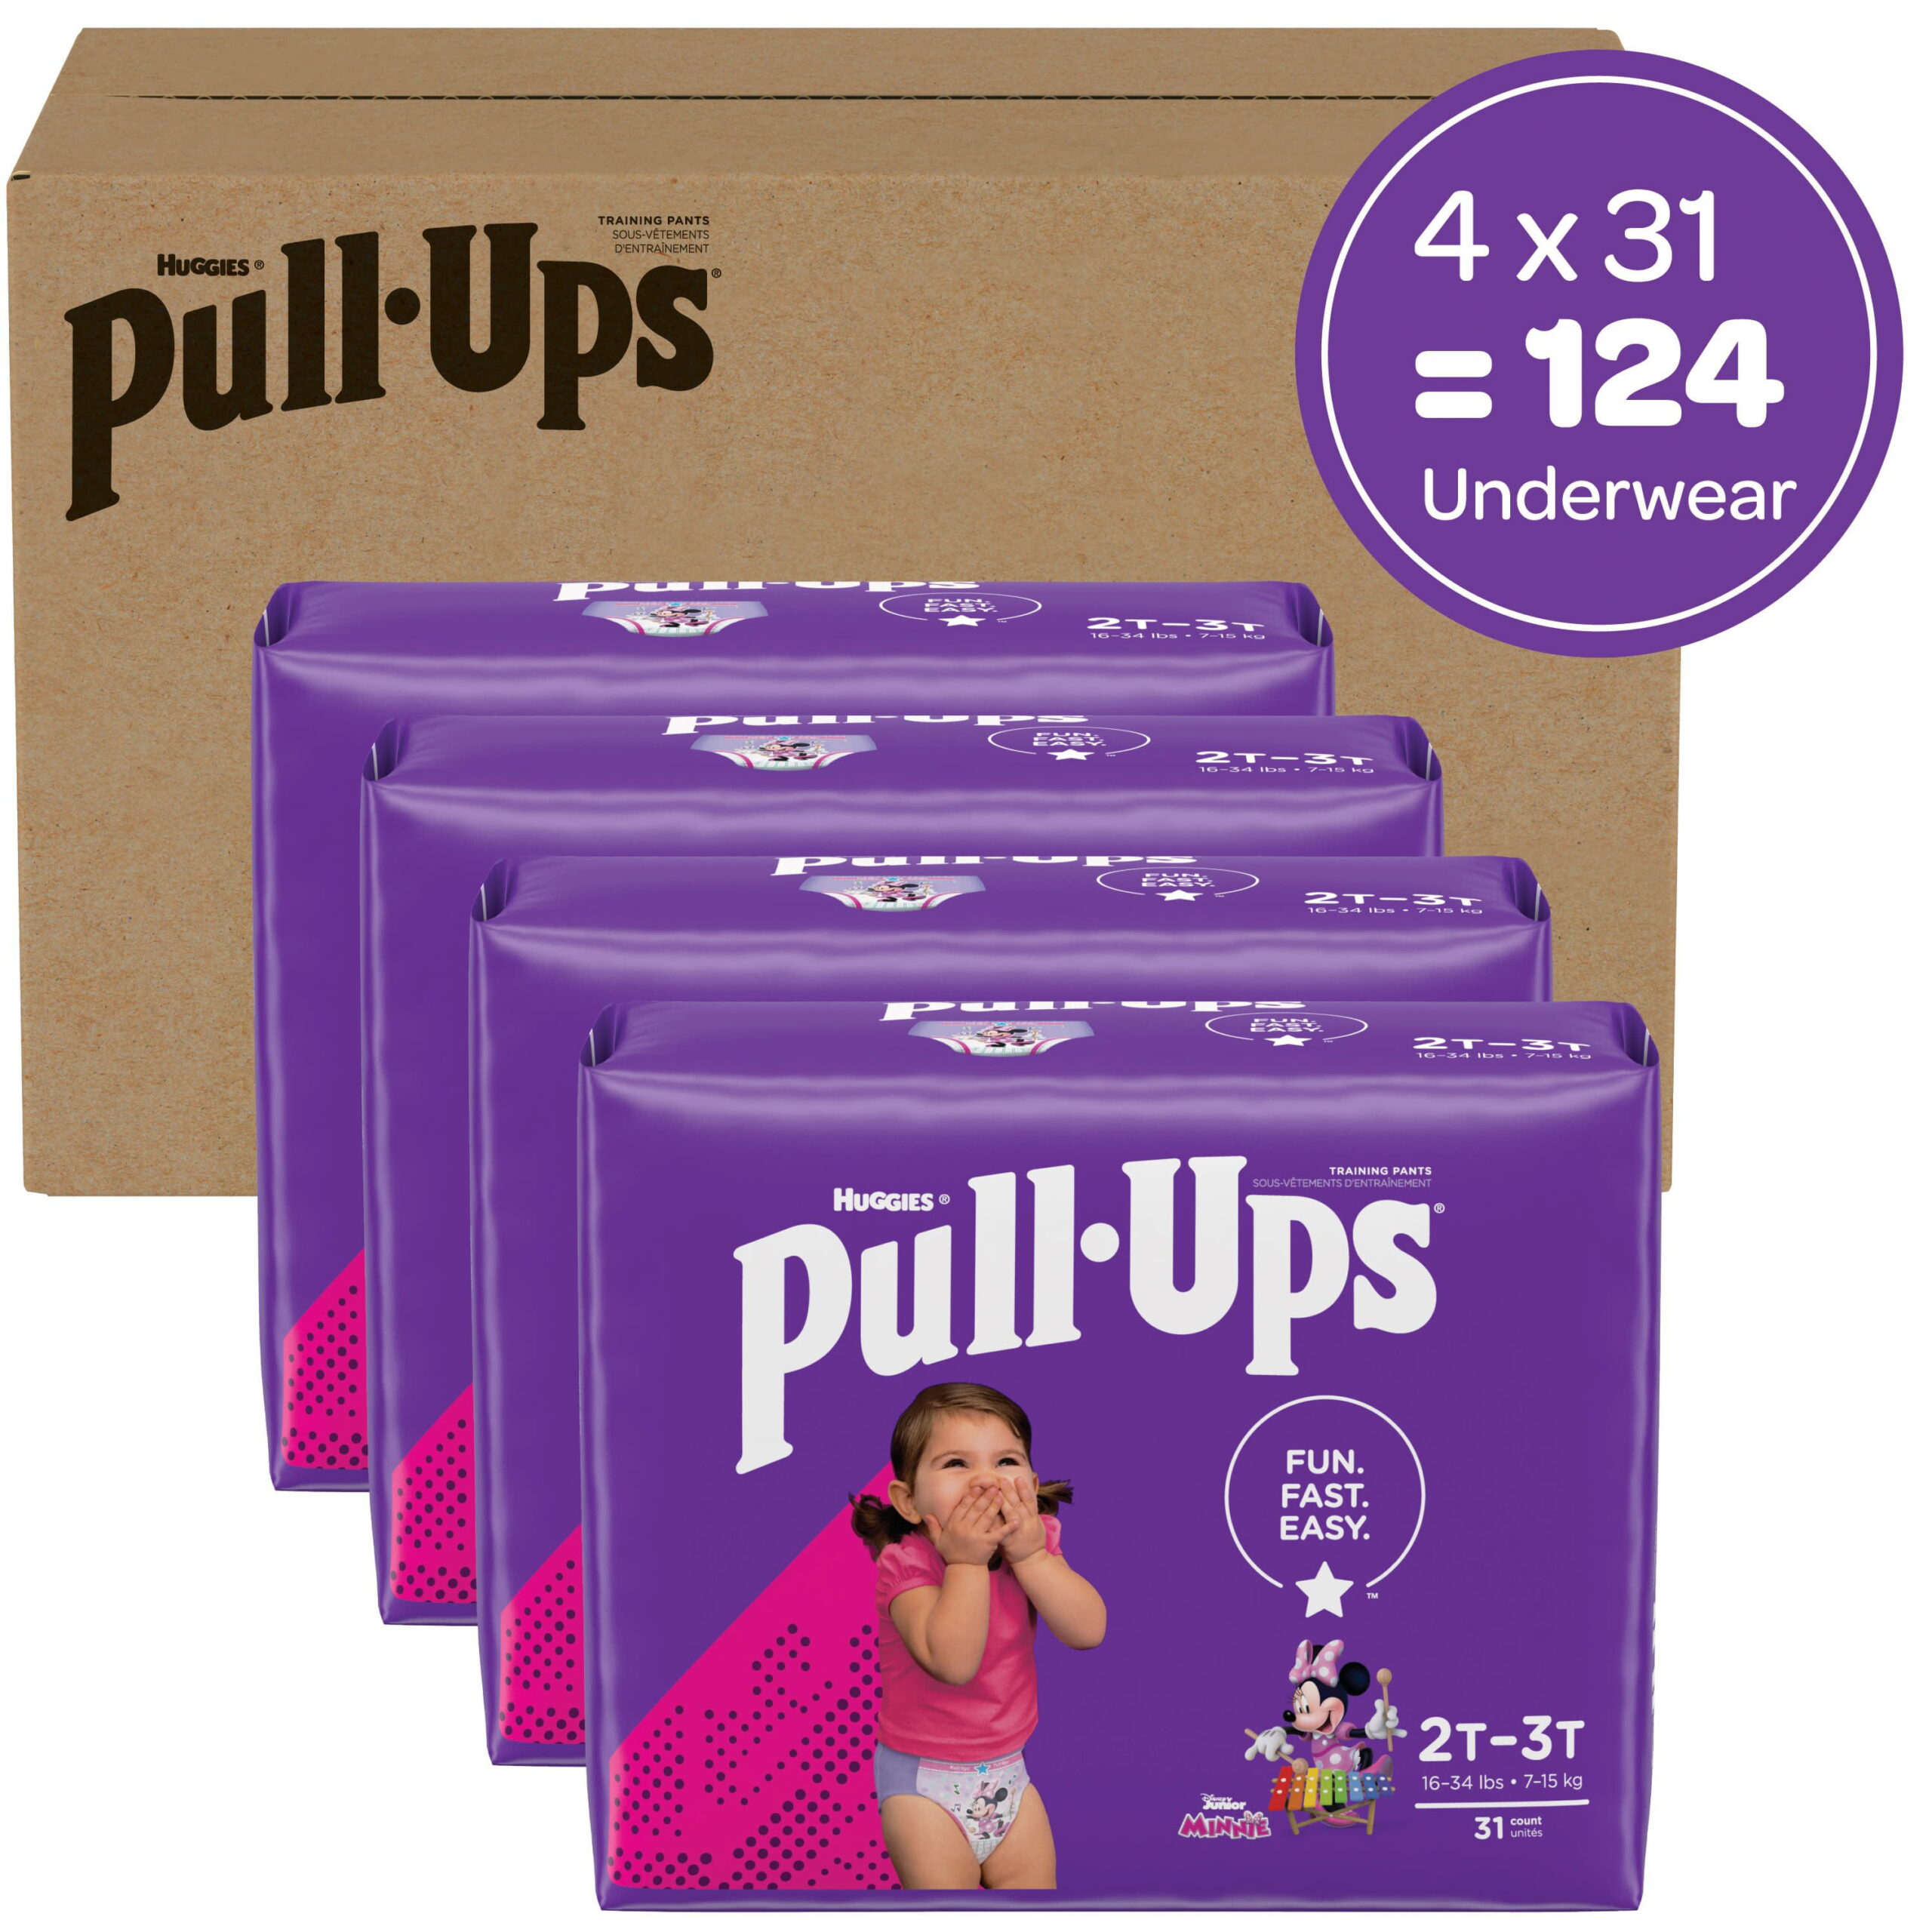 Huggies Pull-Ups Training Pants for Girls - 2T/3T (18-34 Pounds